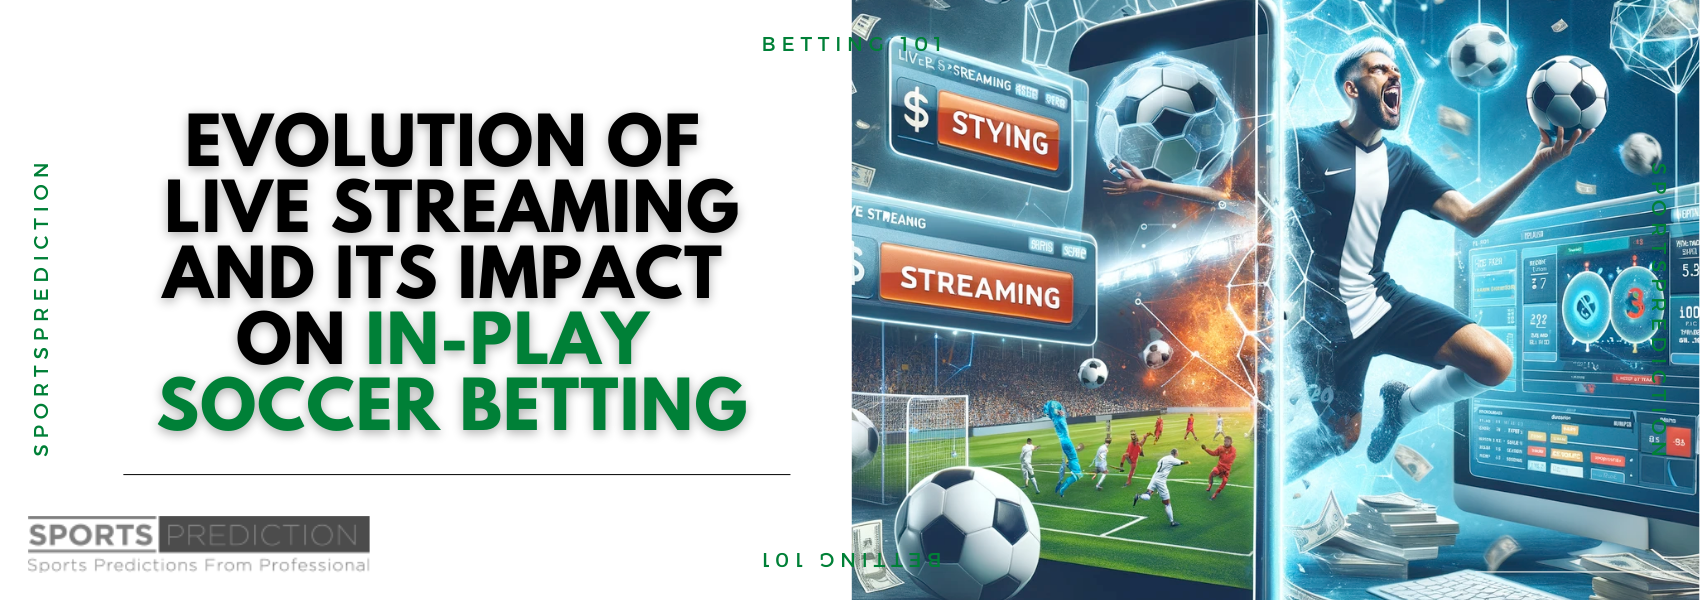 The Transformative Rise Of Live Streaming In In-Play Soccer Betting